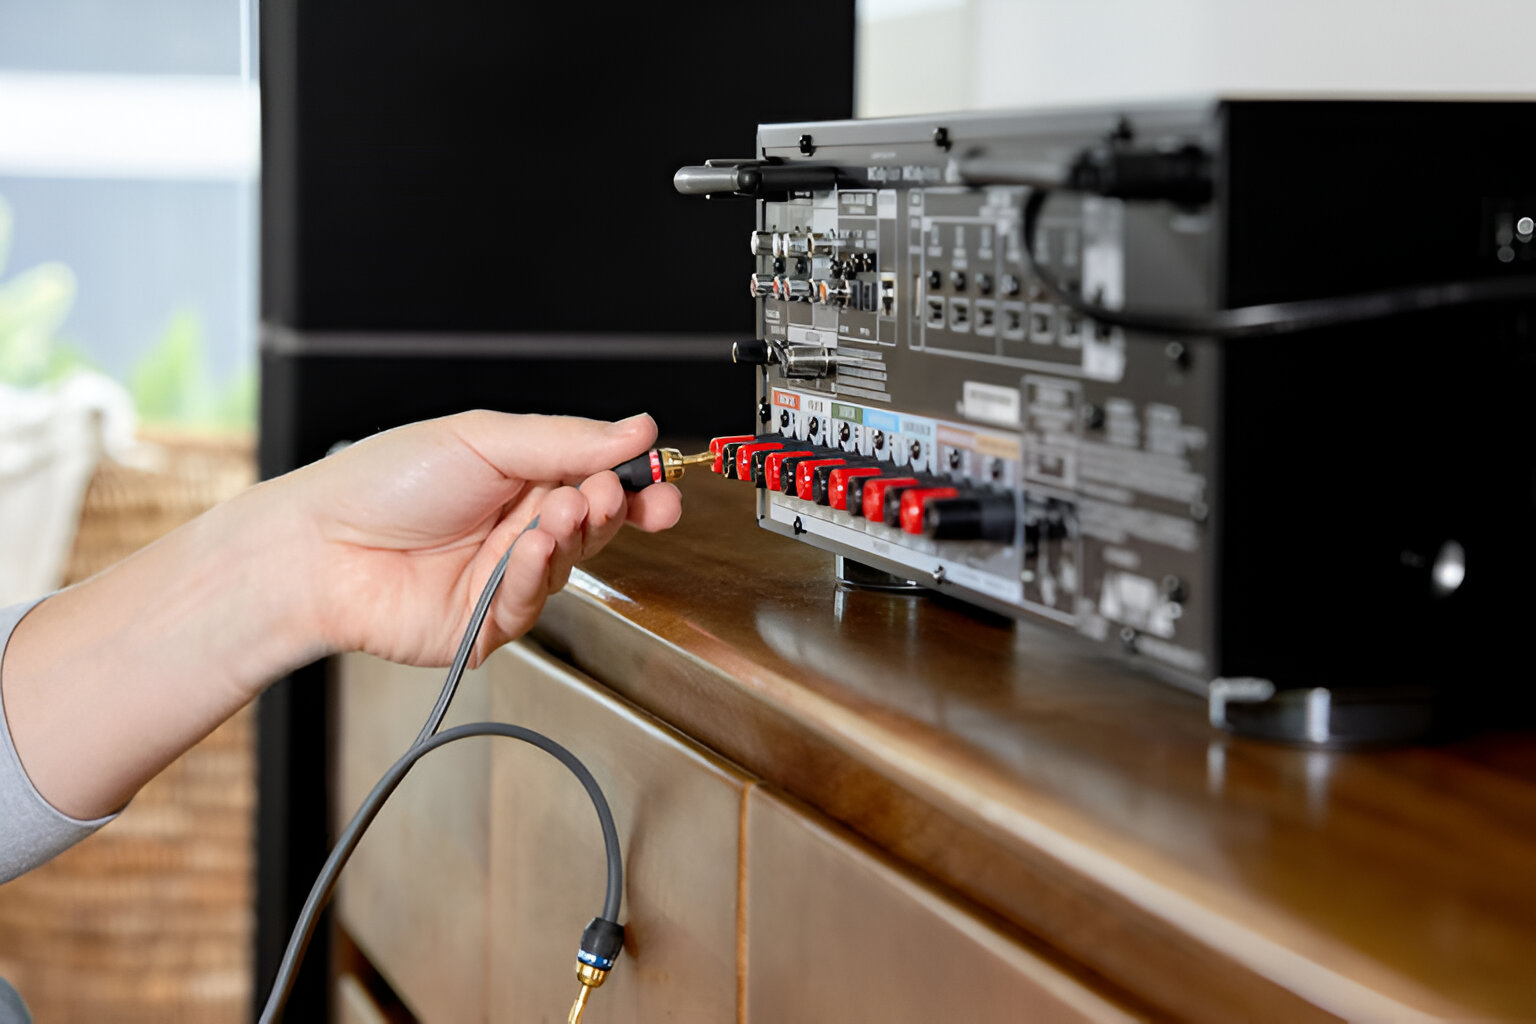 How To Connect An Amplifier To An AV Receiver